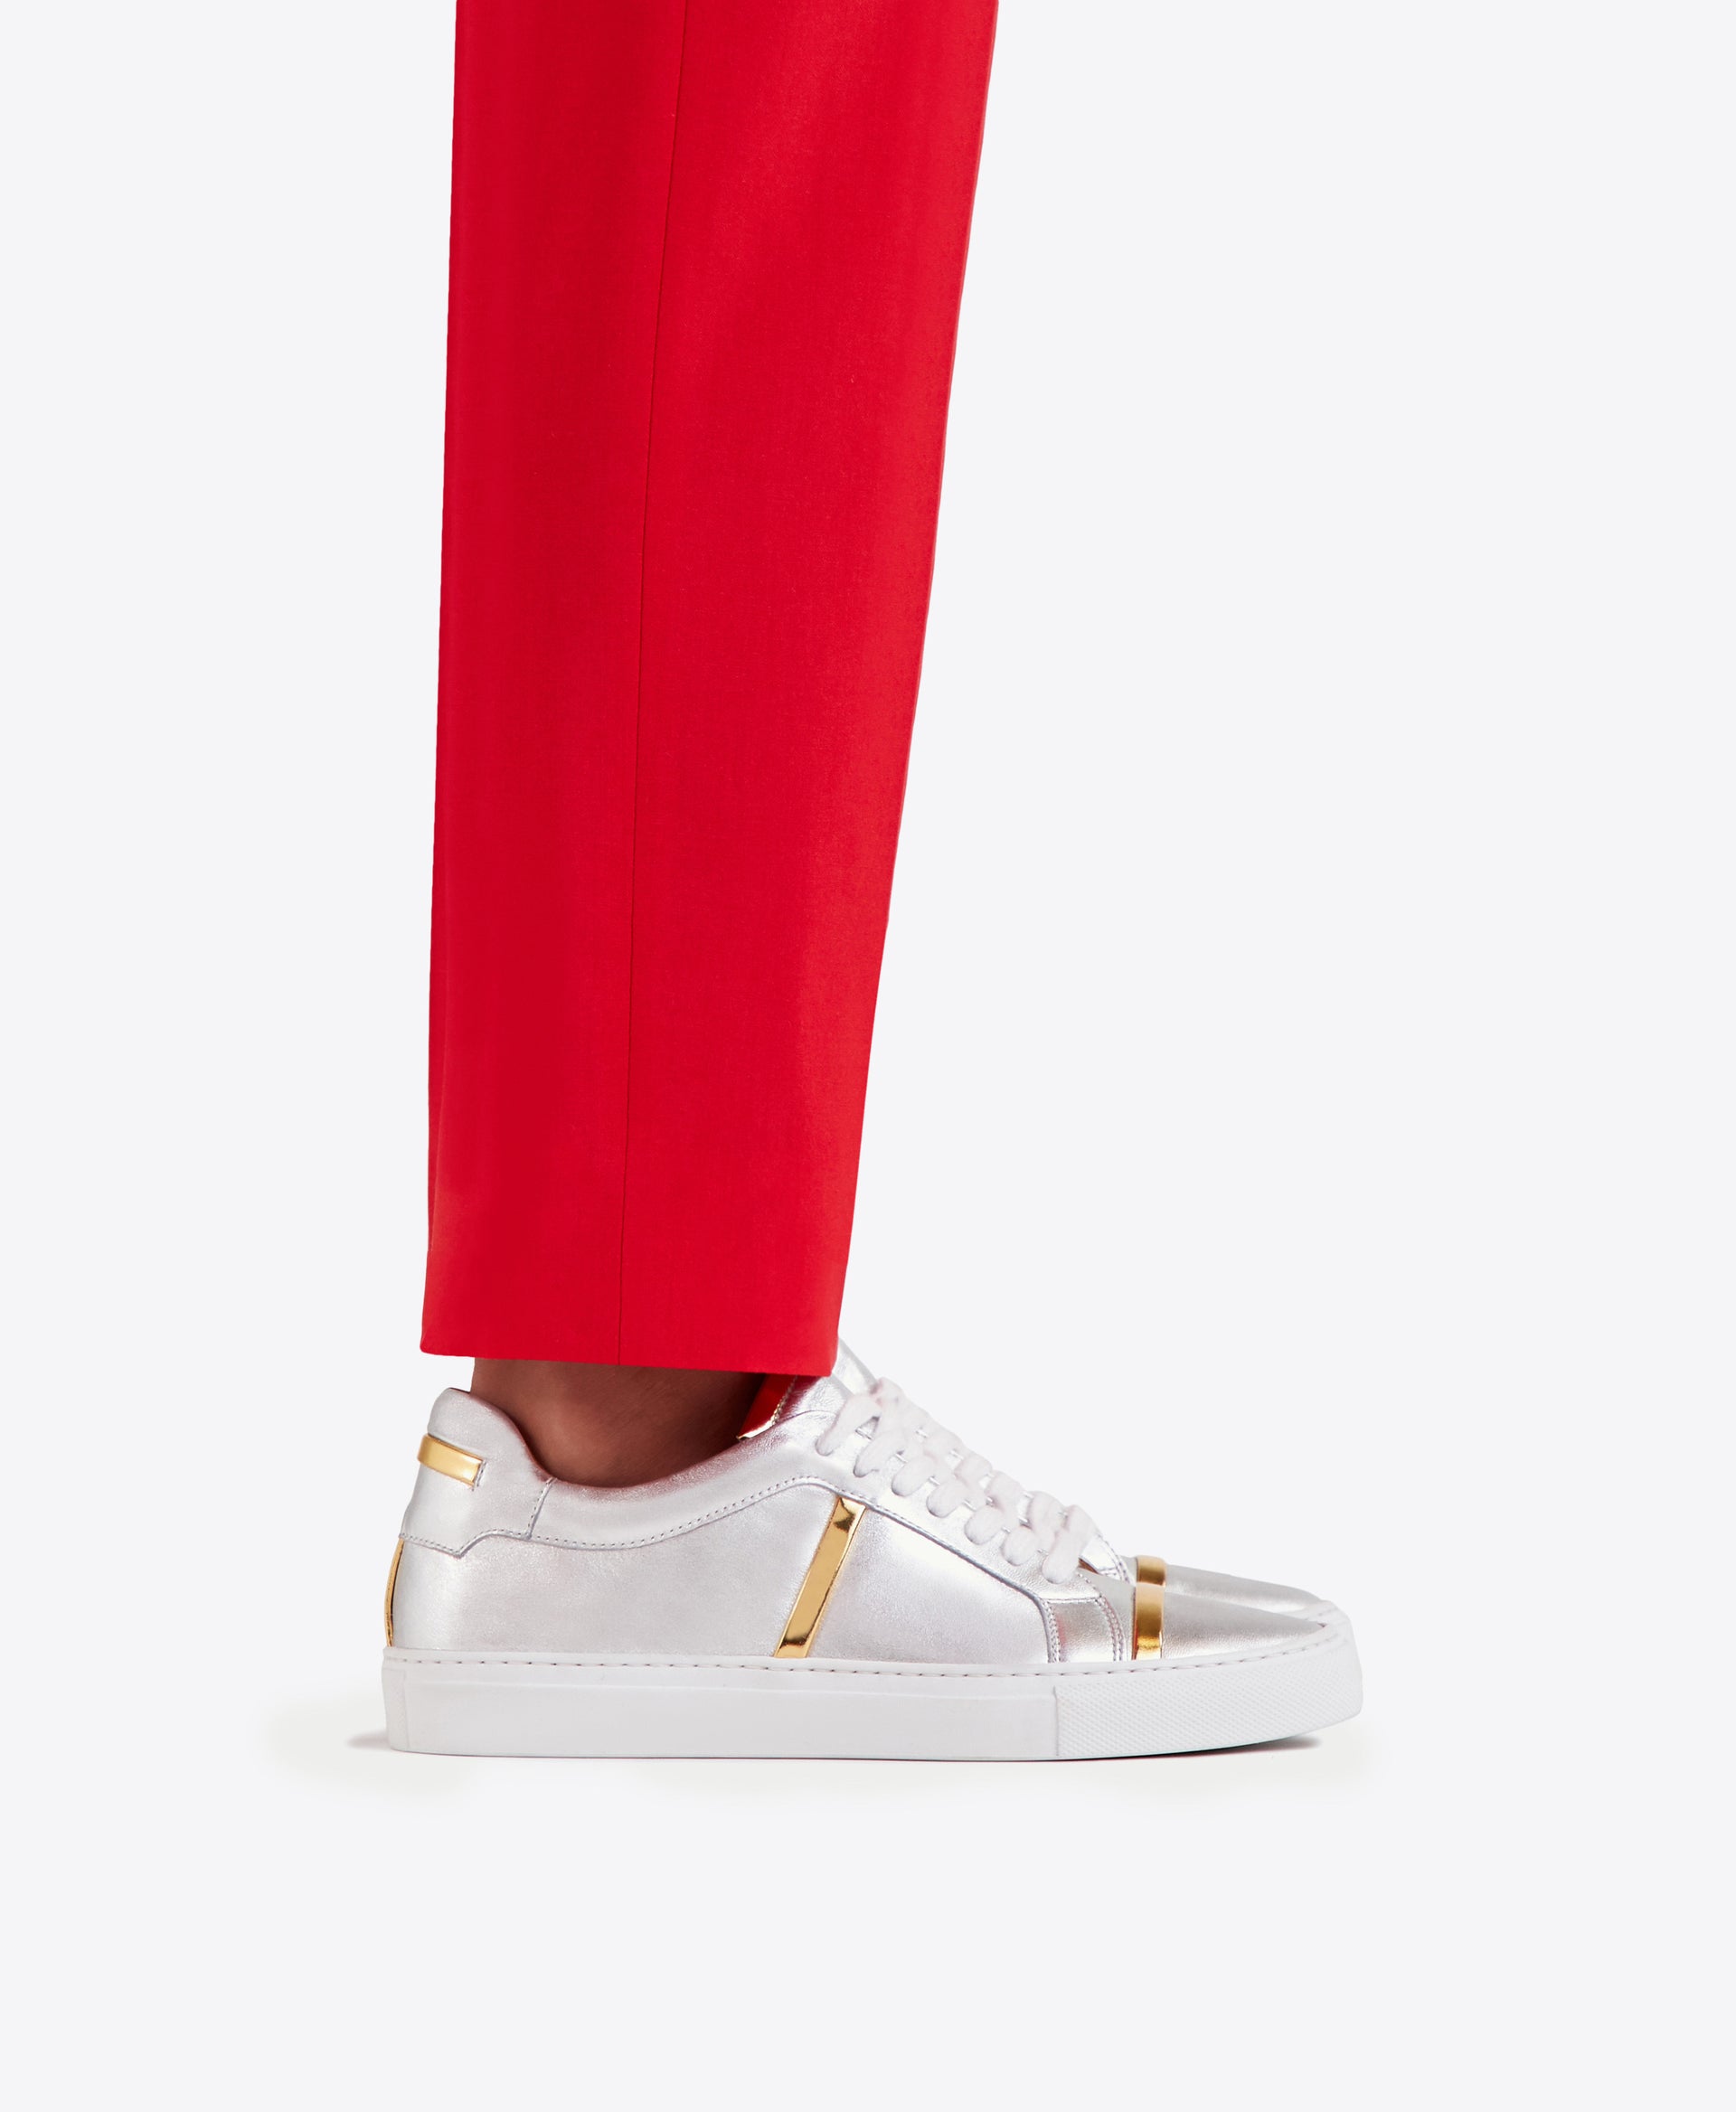 Deon Metallic Silver Leather Sneakers | Malone Souliers